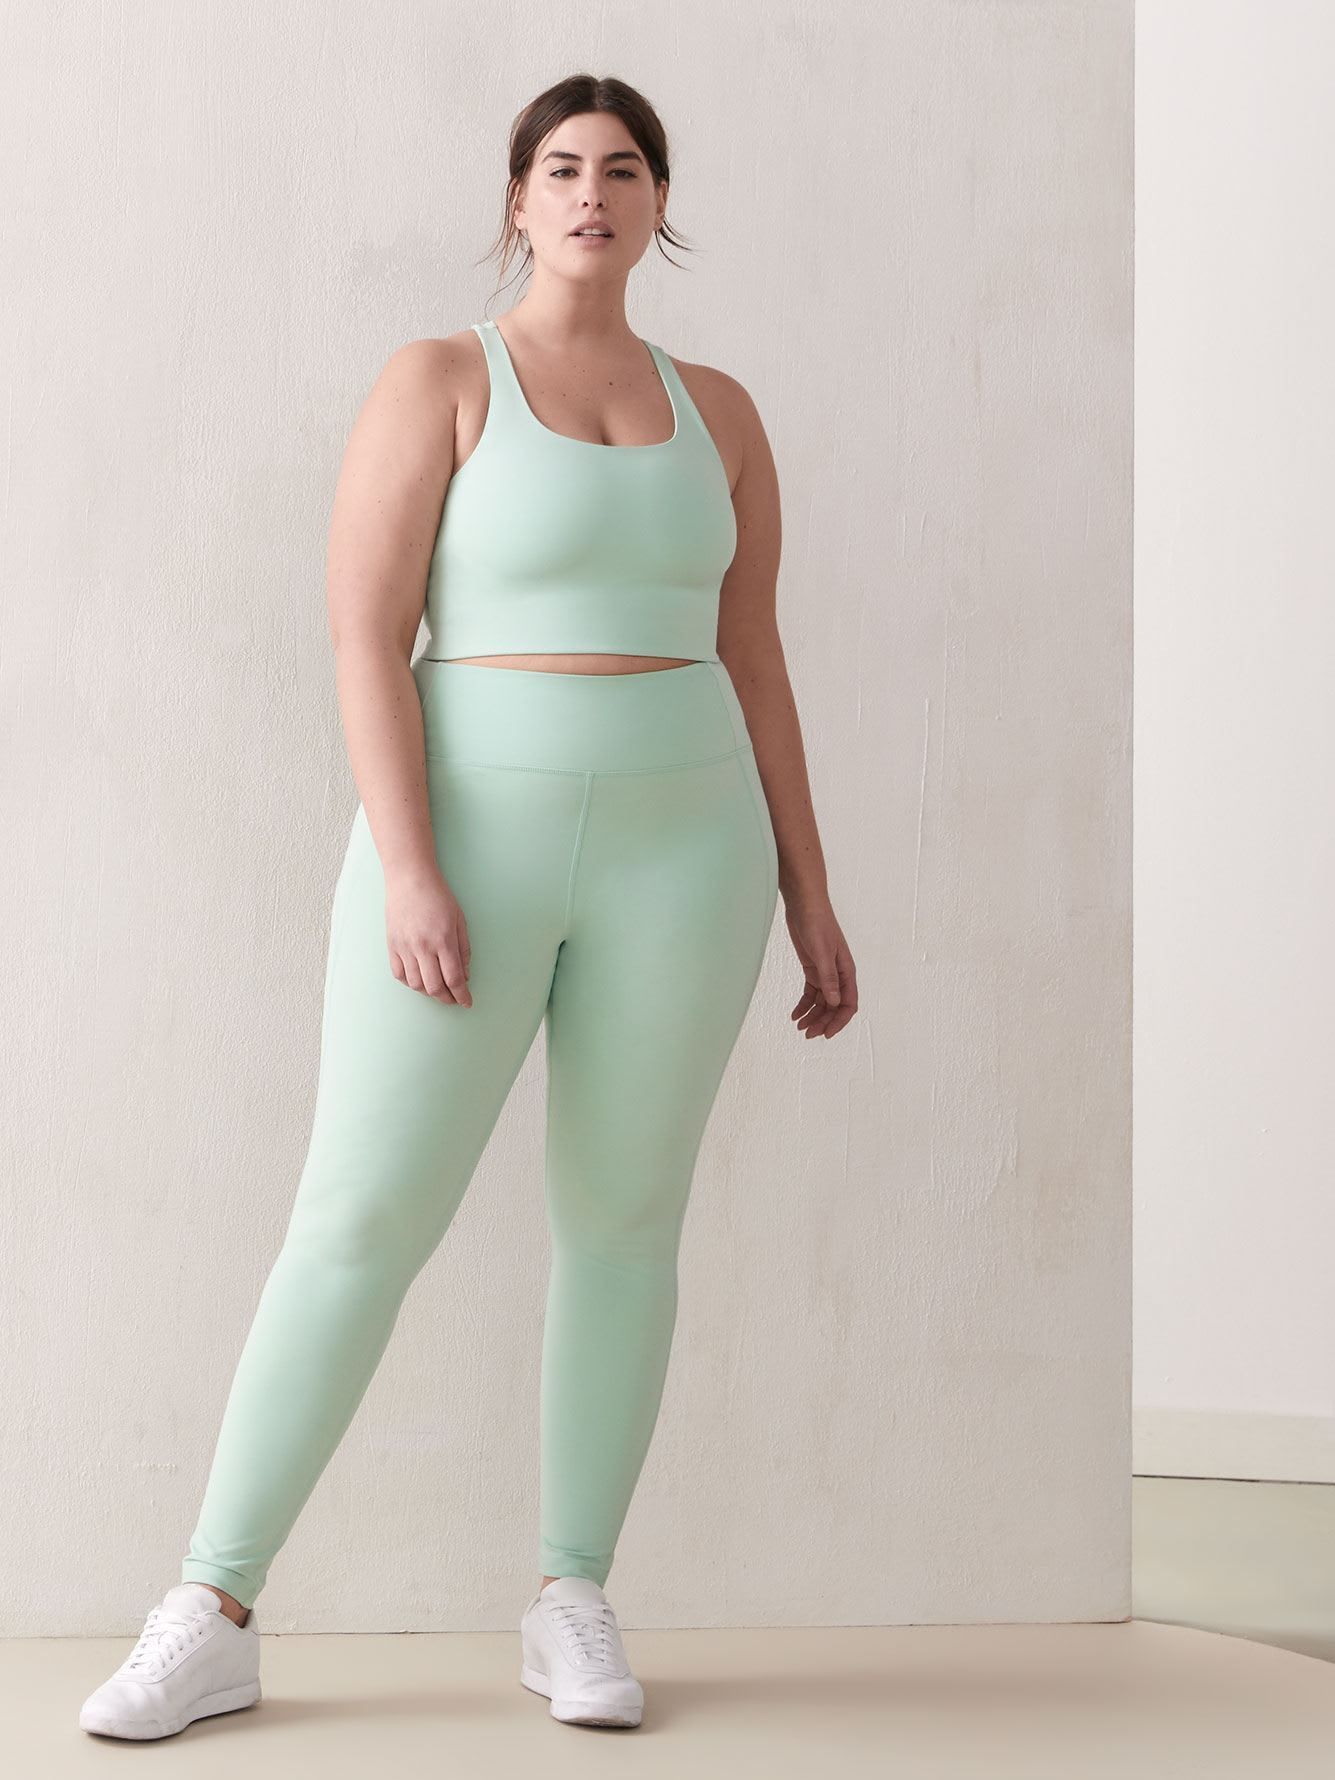 Beyond Yoga review: Are the Spacedye leggings worth it? - Reviewed